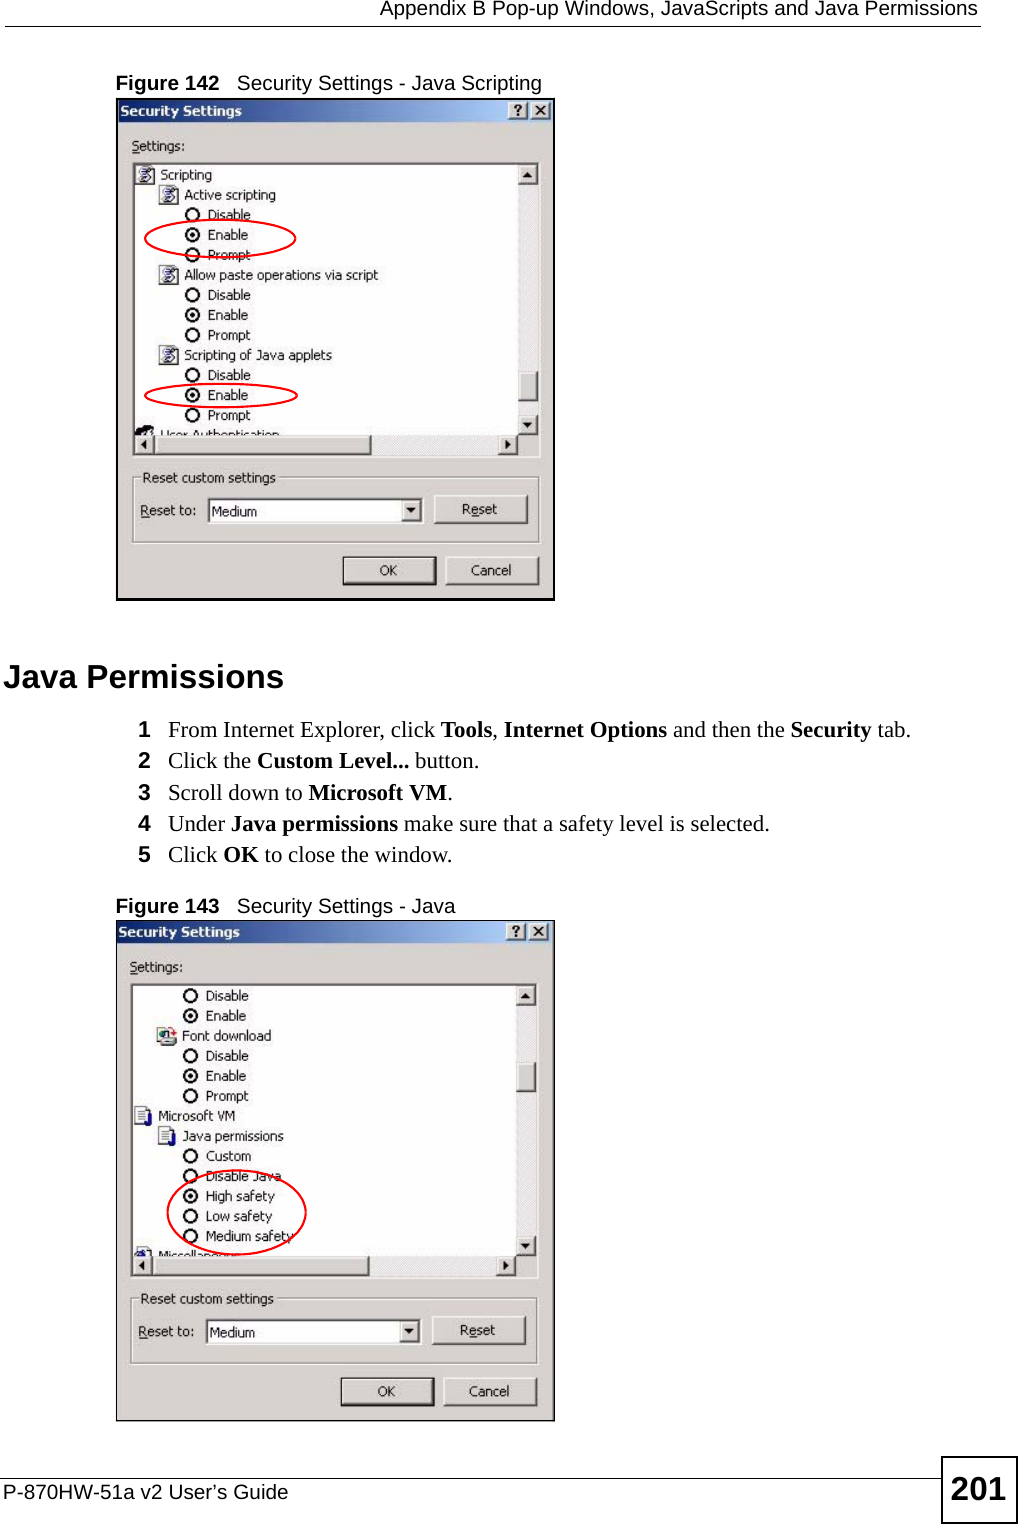  Appendix B Pop-up Windows, JavaScripts and Java PermissionsP-870HW-51a v2 User’s Guide 201Figure 142   Security Settings - Java ScriptingJava Permissions1From Internet Explorer, click Tools, Internet Options and then the Security tab. 2Click the Custom Level... button. 3Scroll down to Microsoft VM. 4Under Java permissions make sure that a safety level is selected.5Click OK to close the window.Figure 143   Security Settings - Java 